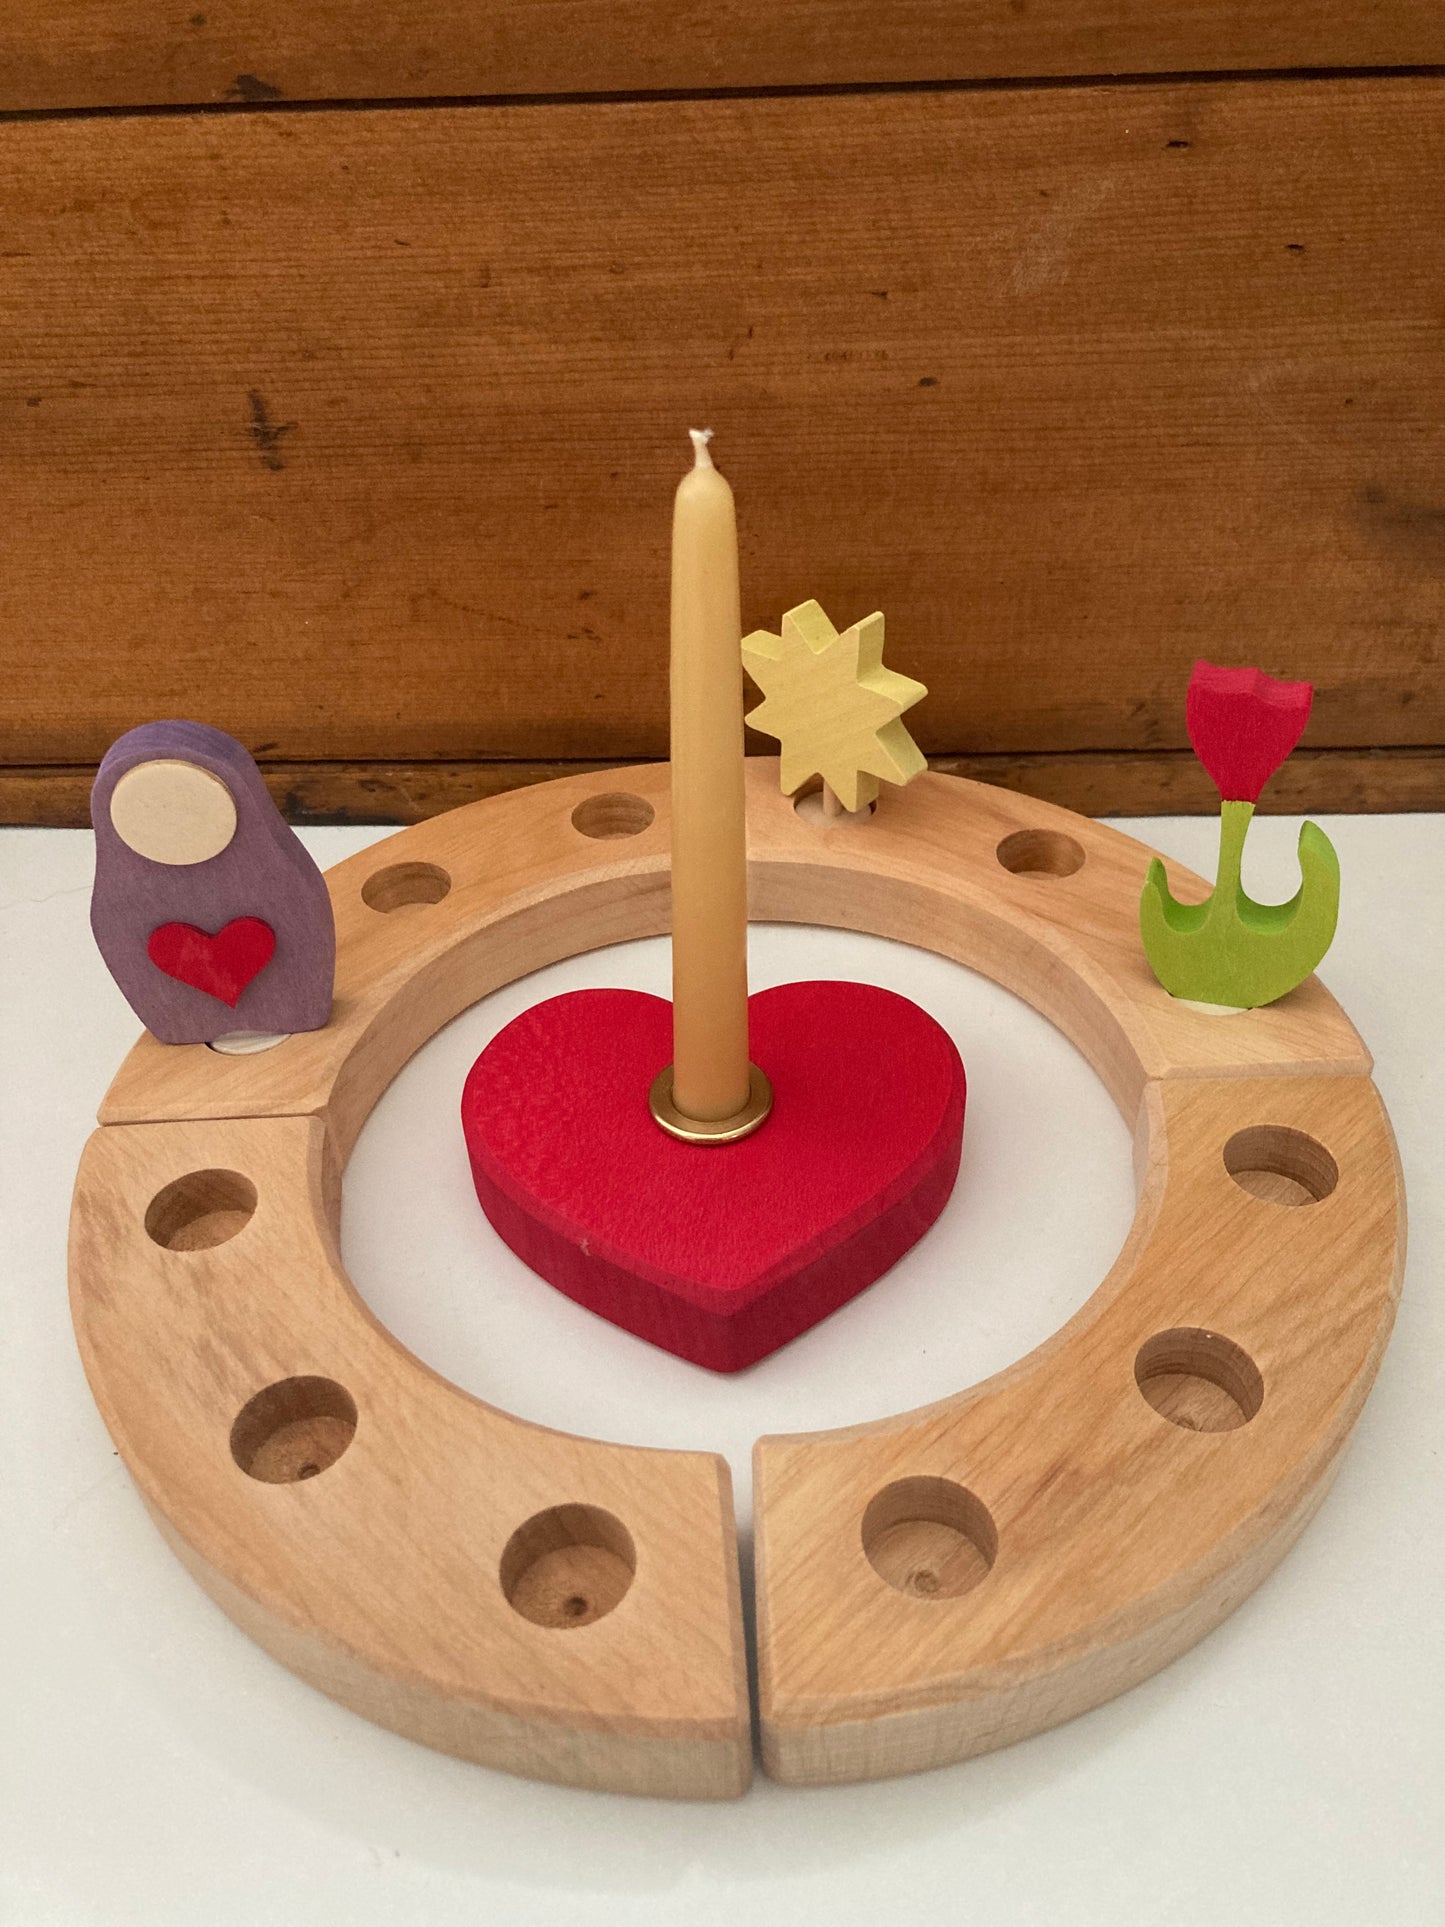 Wooden Deco by Grimm’s - RED HEART with single hole for Candle or Deco Figure